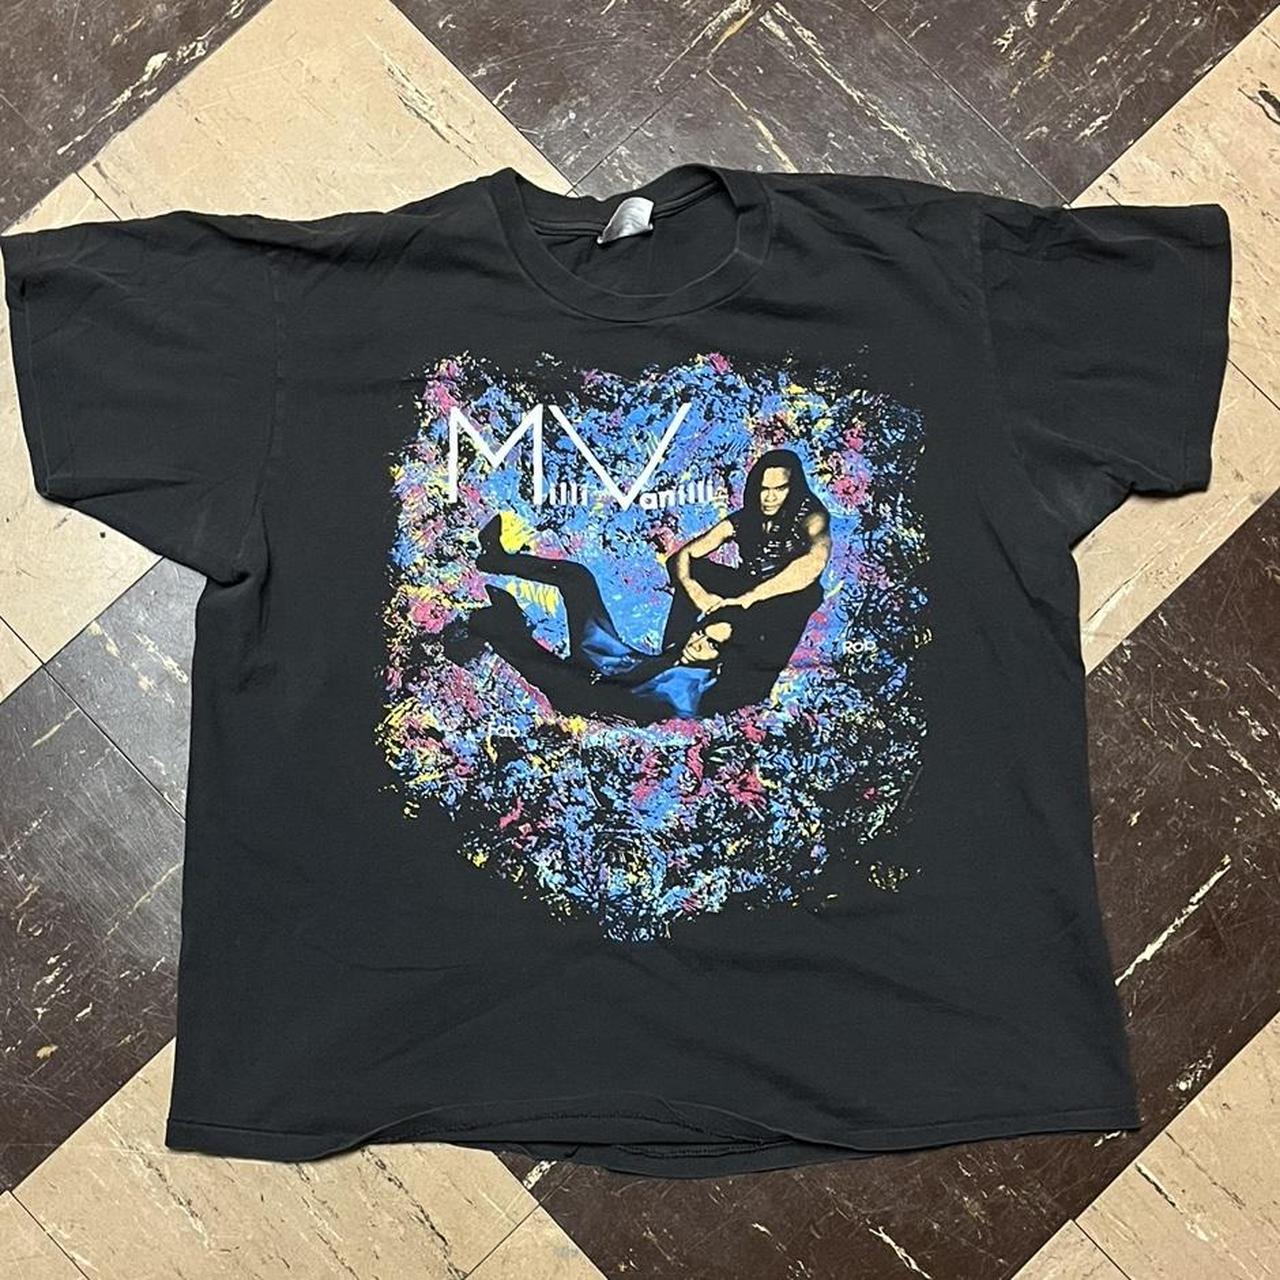 Vintage Milli Vanilli T-shirt from 1990 in excellent...